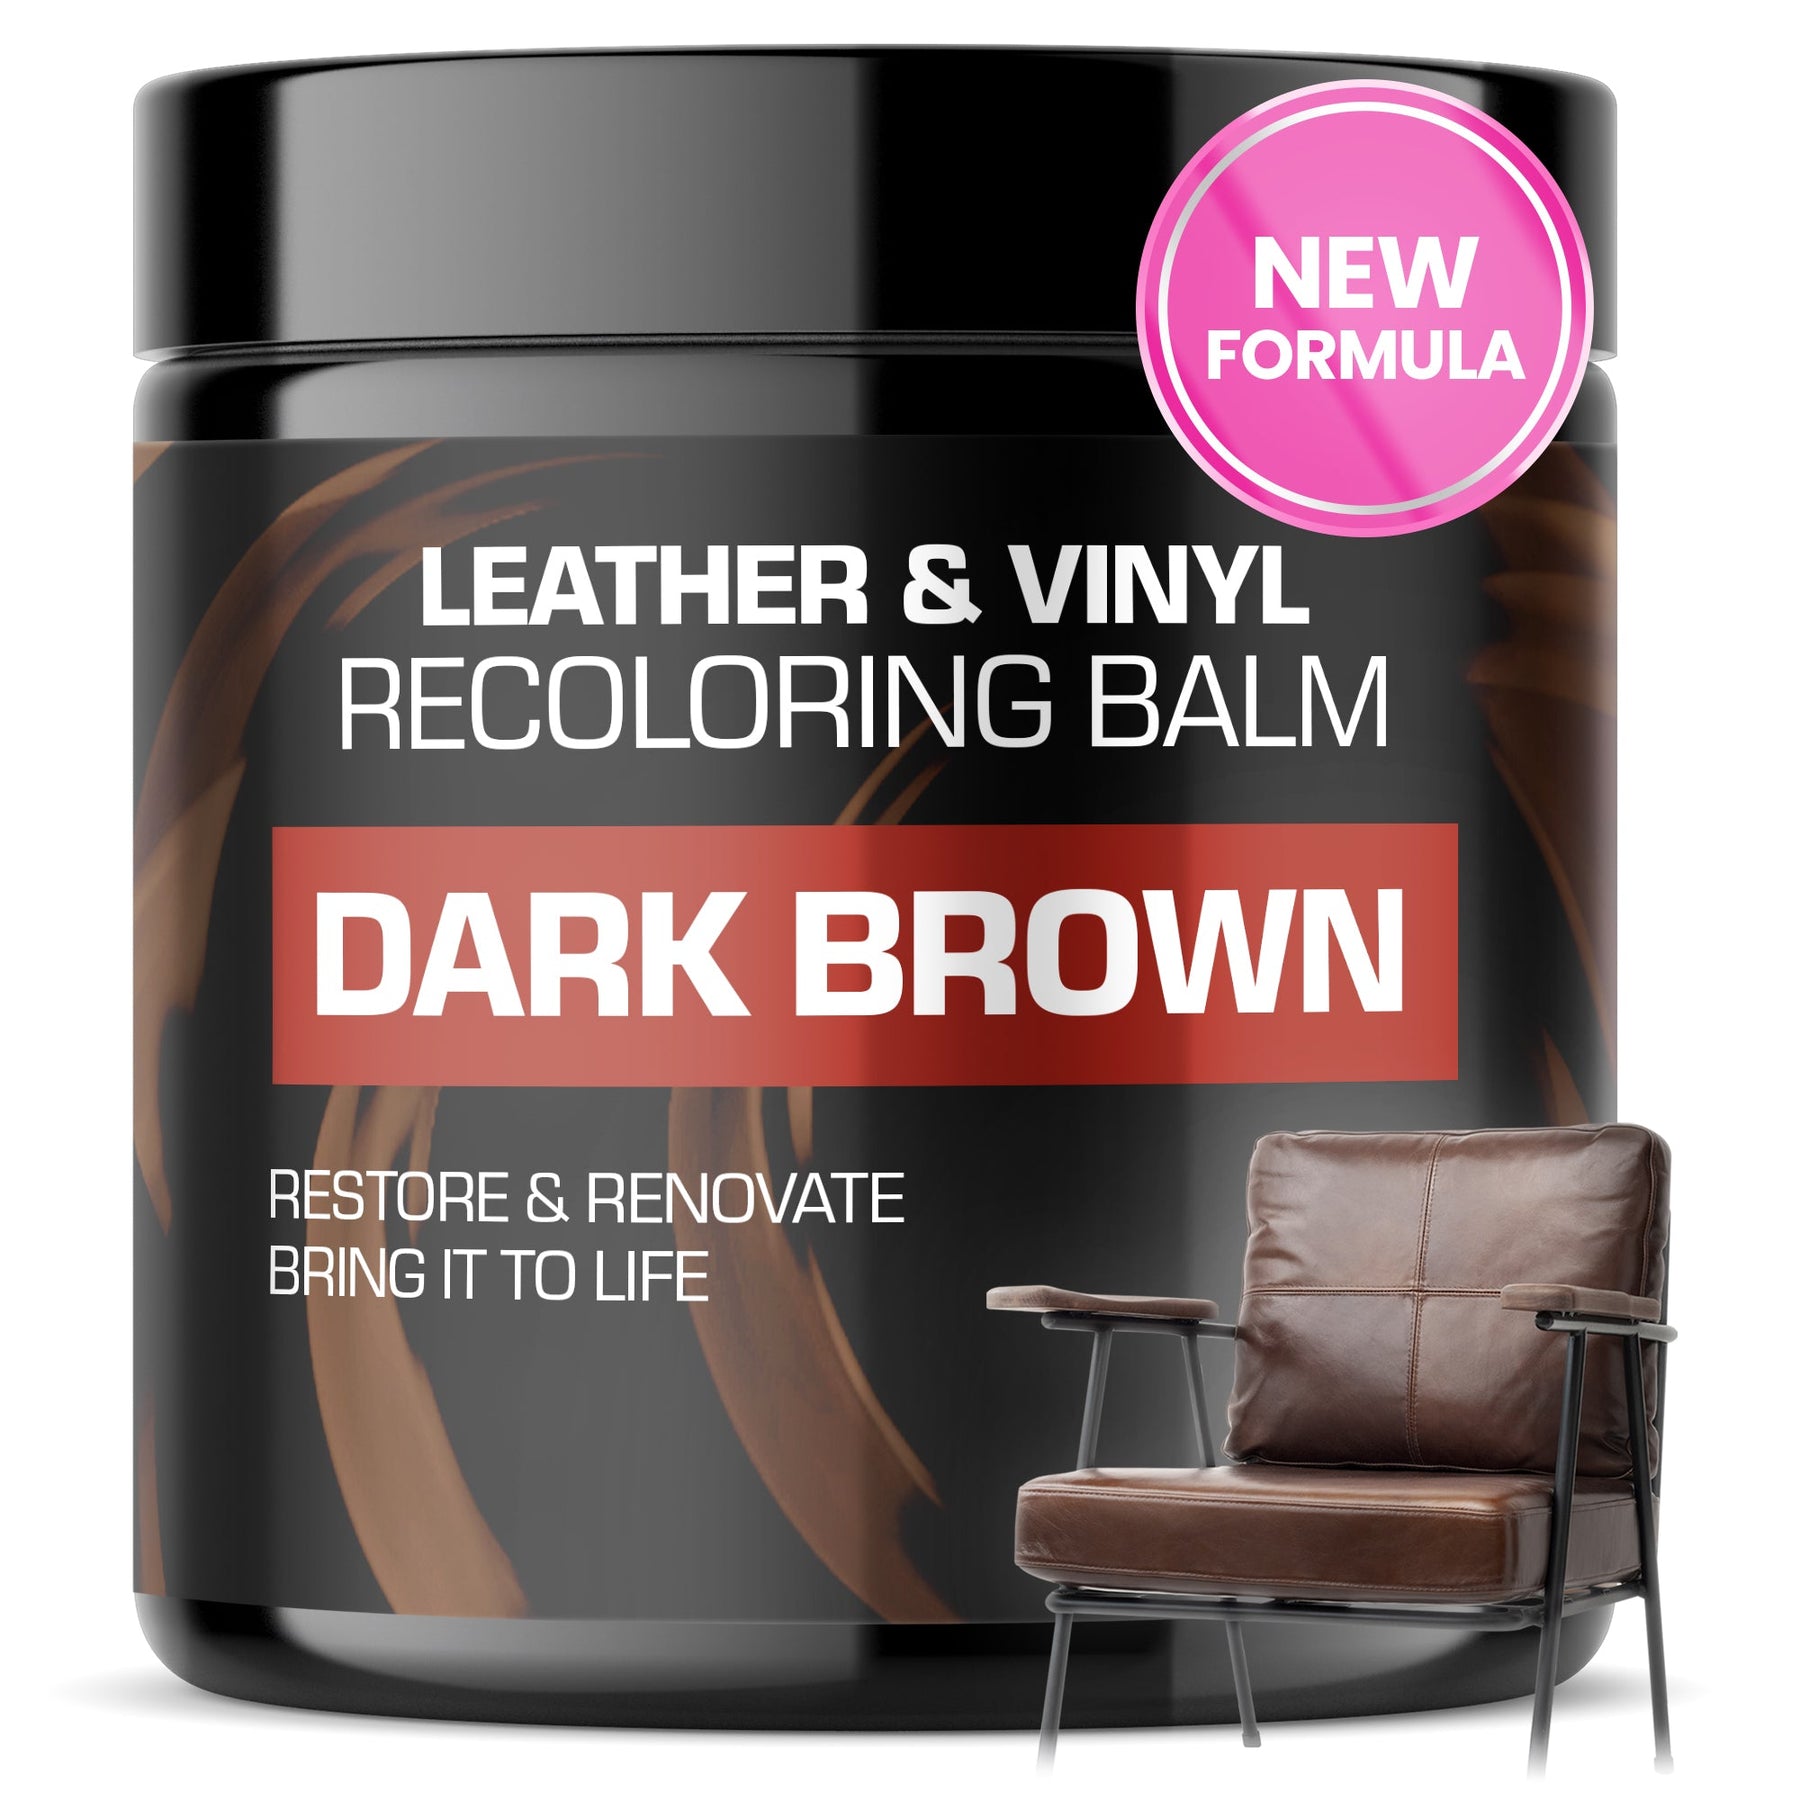 Coconix Brown Leather and Vinyl Repair Kit - Restorer of Your Couch, S